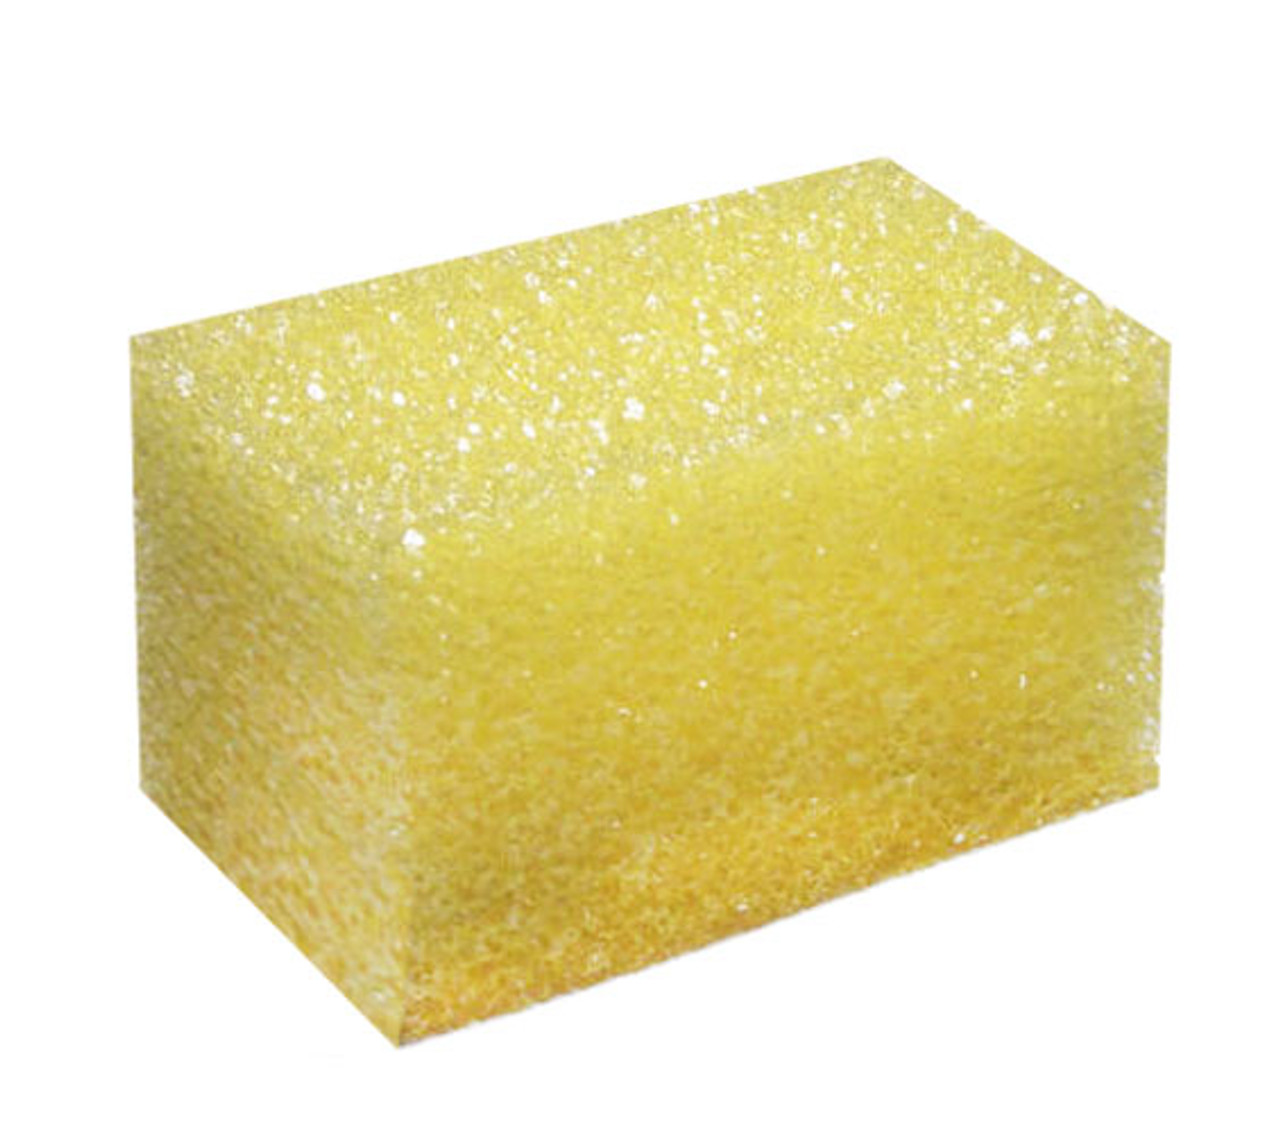 Do-All Scrubber - Large 3" x 5" x 3"